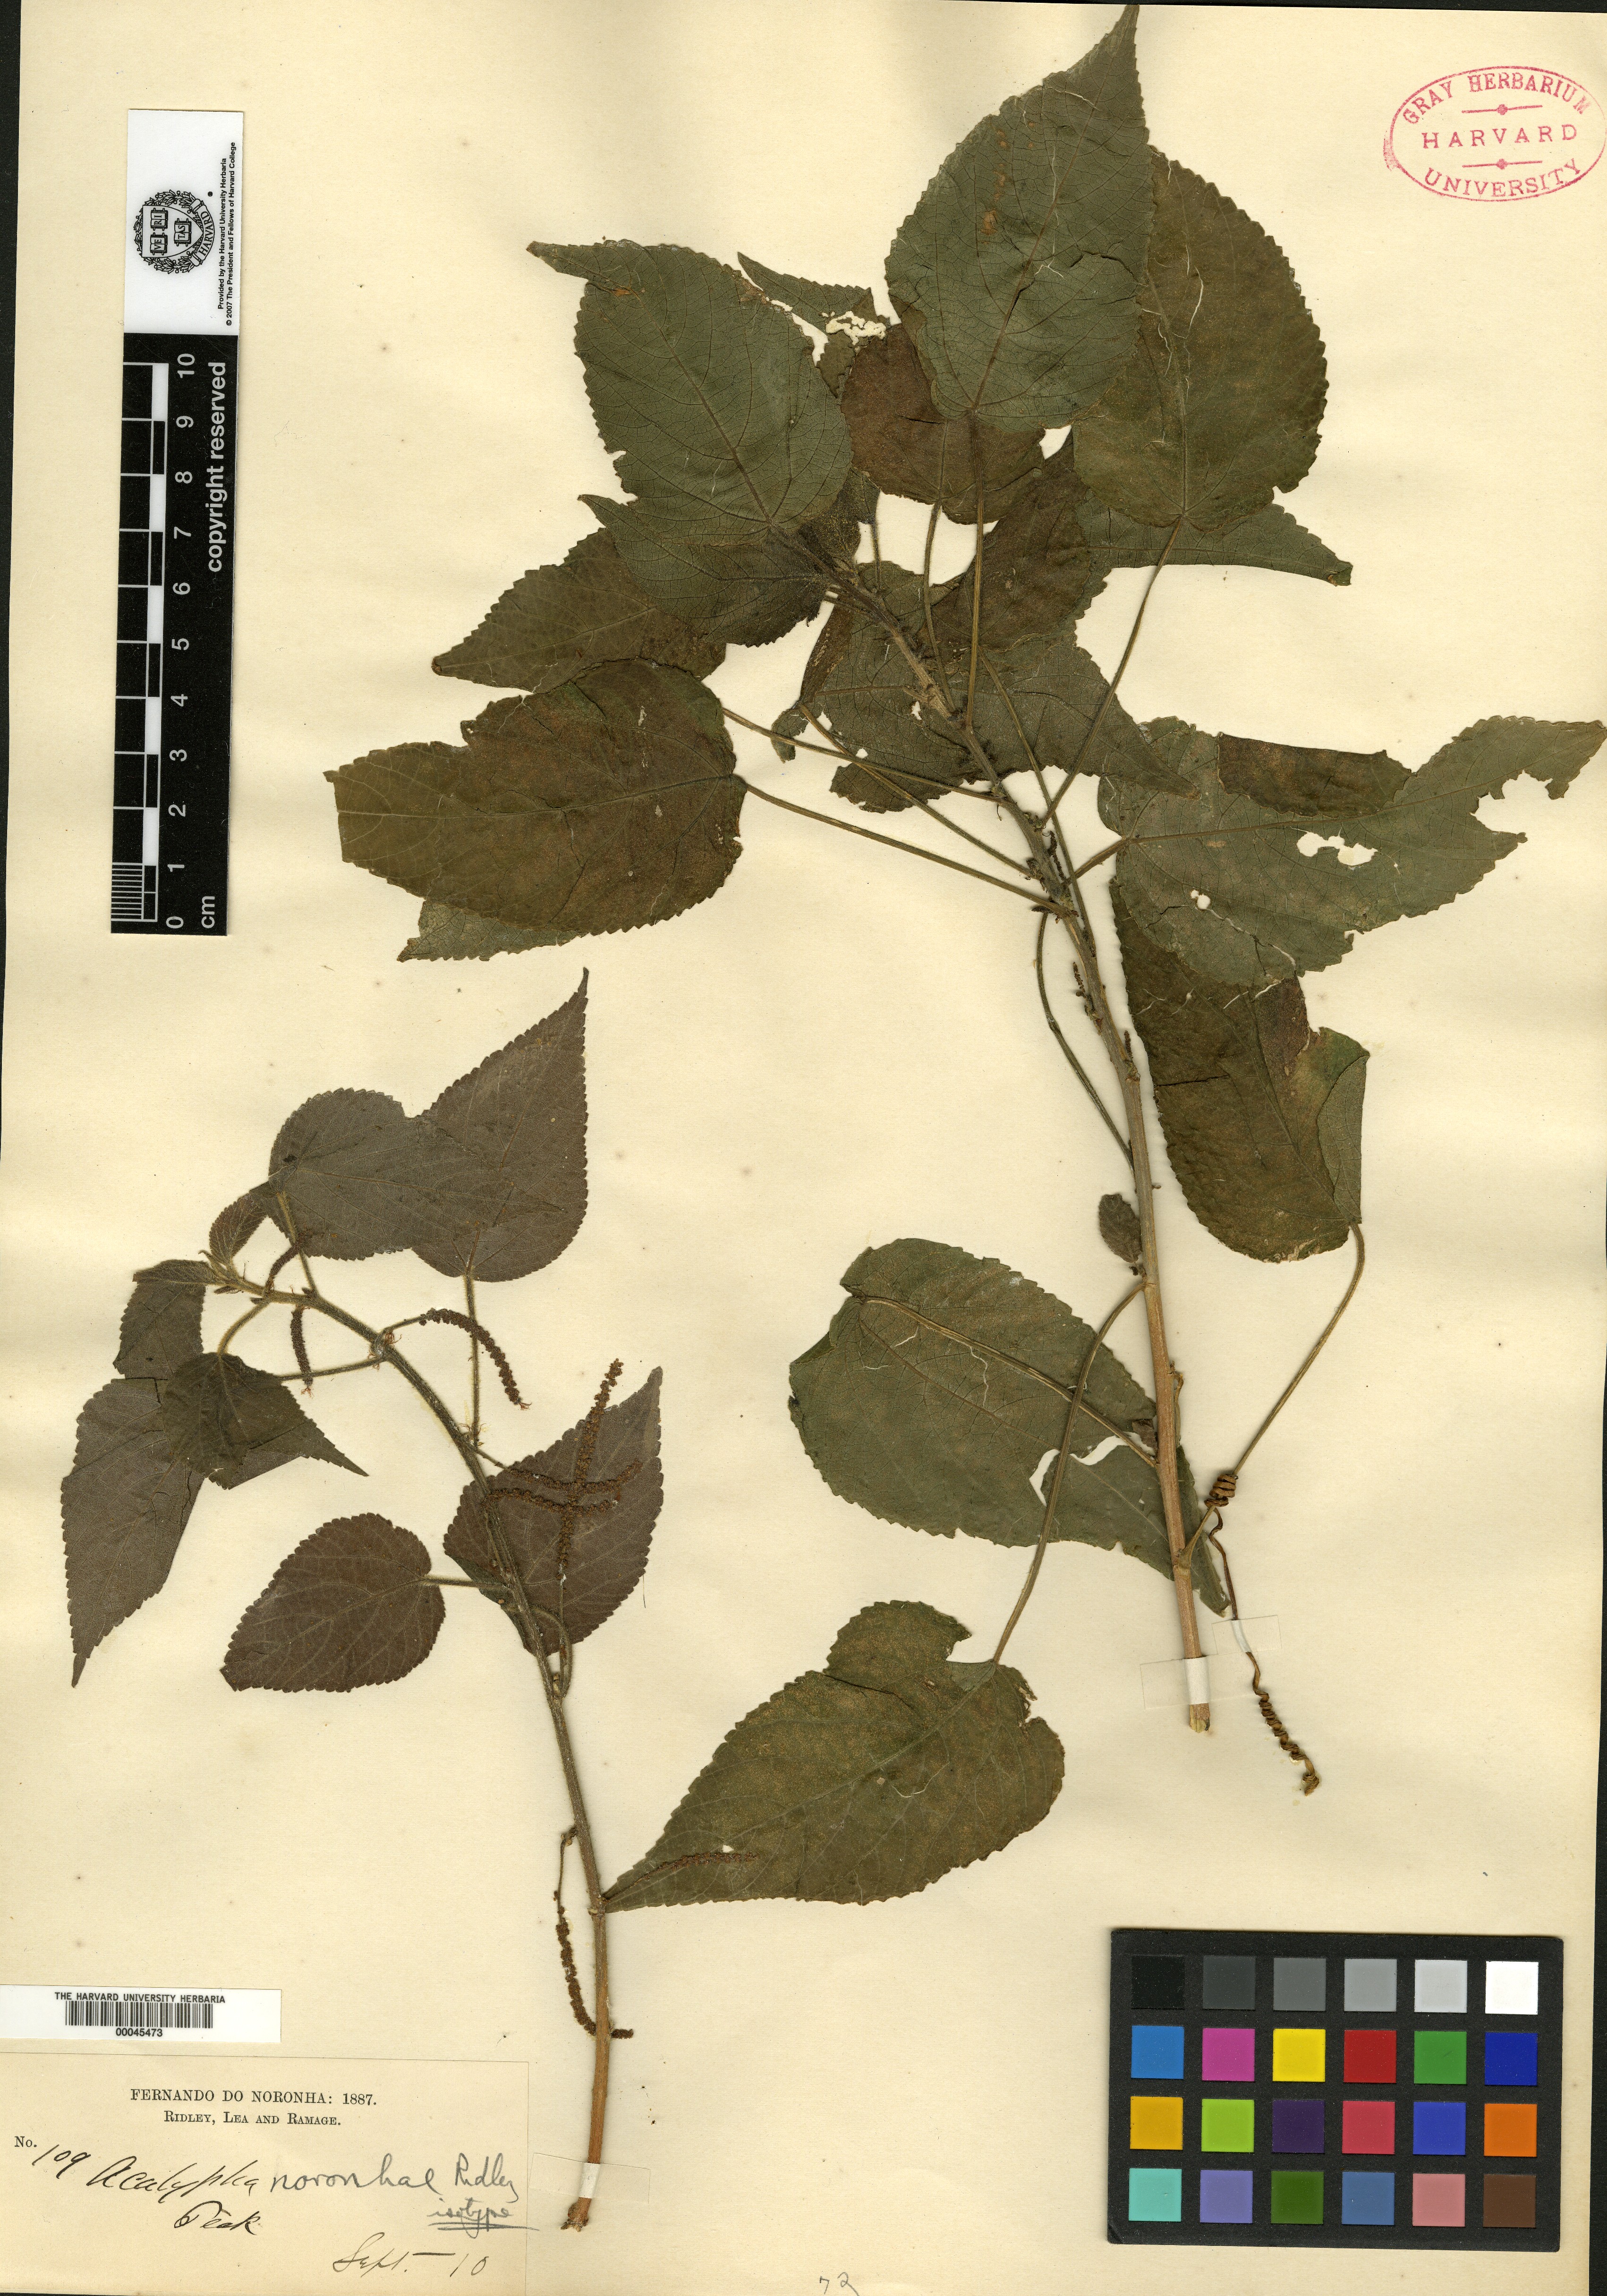 Acalypha pseudalopecuroides image